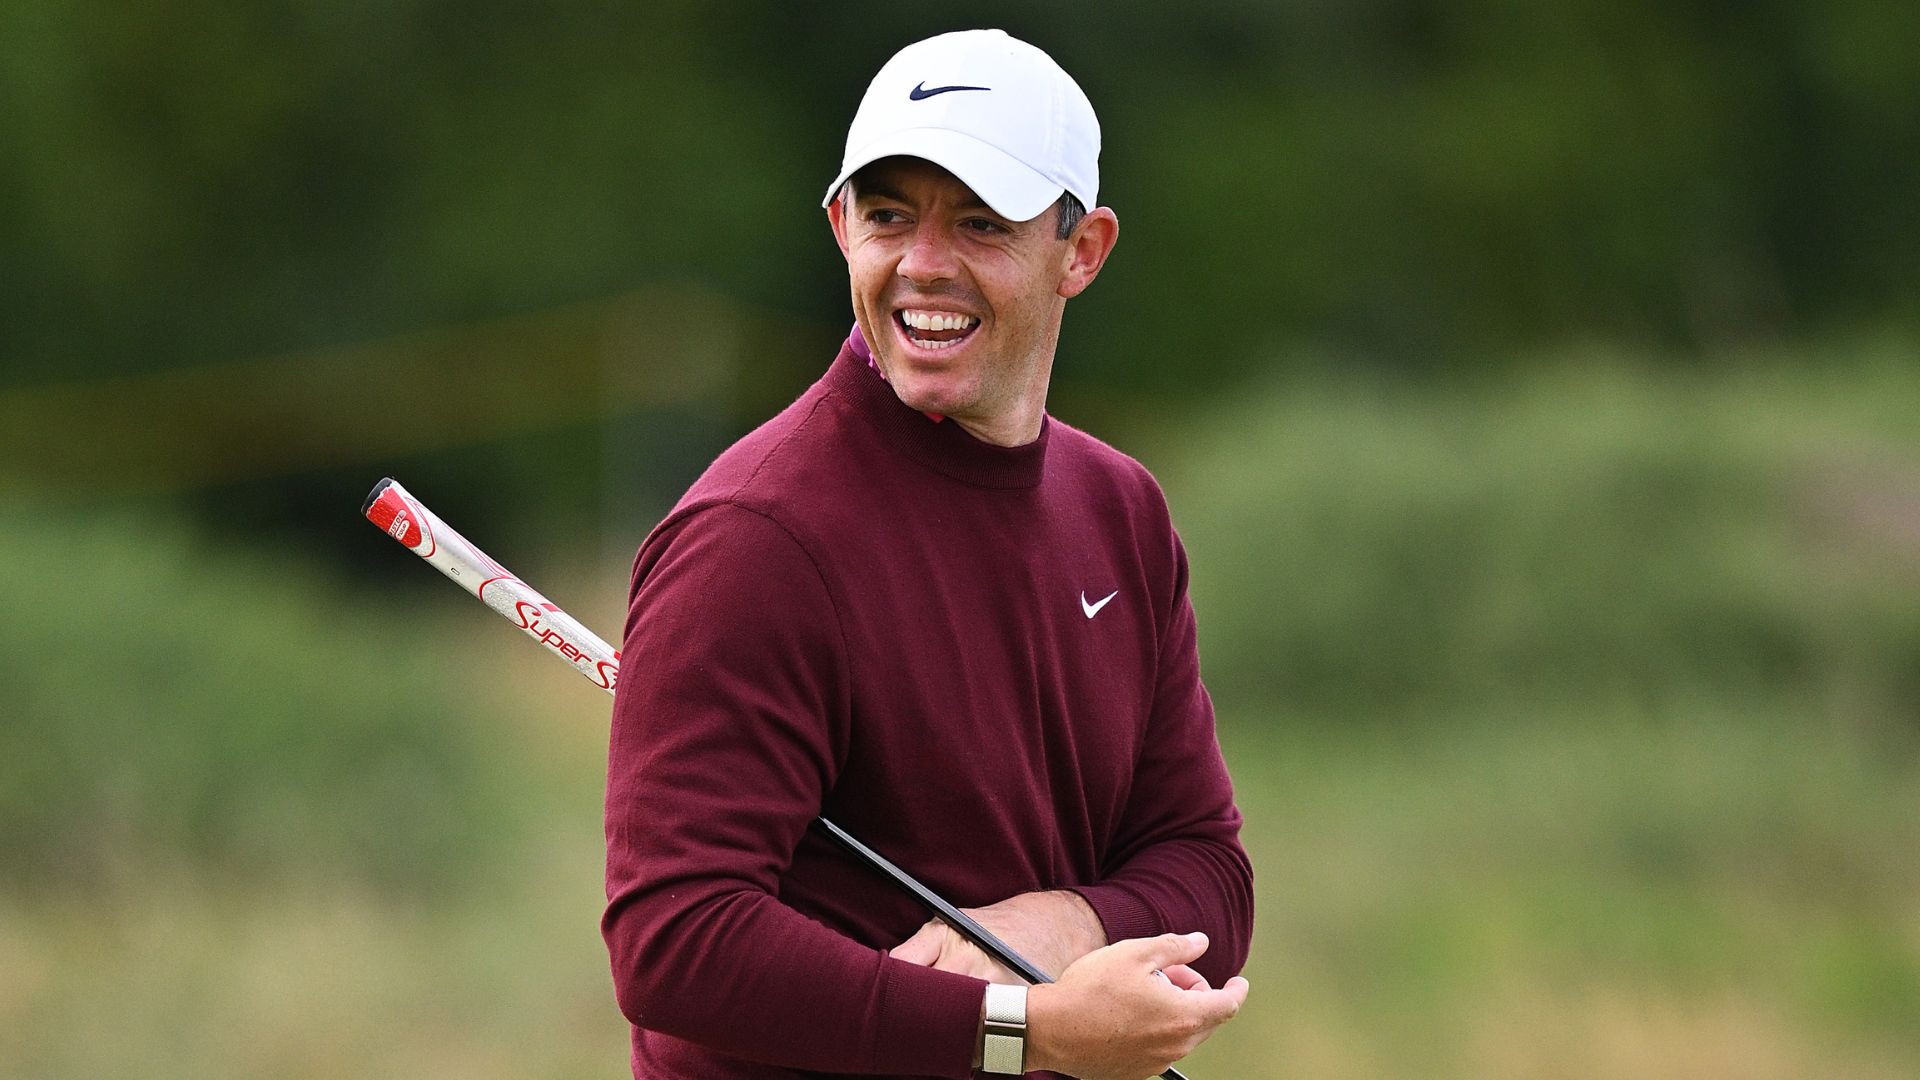 2023 British Open: Rory McIlroy balancing carefree approach, sense of urgency in major search